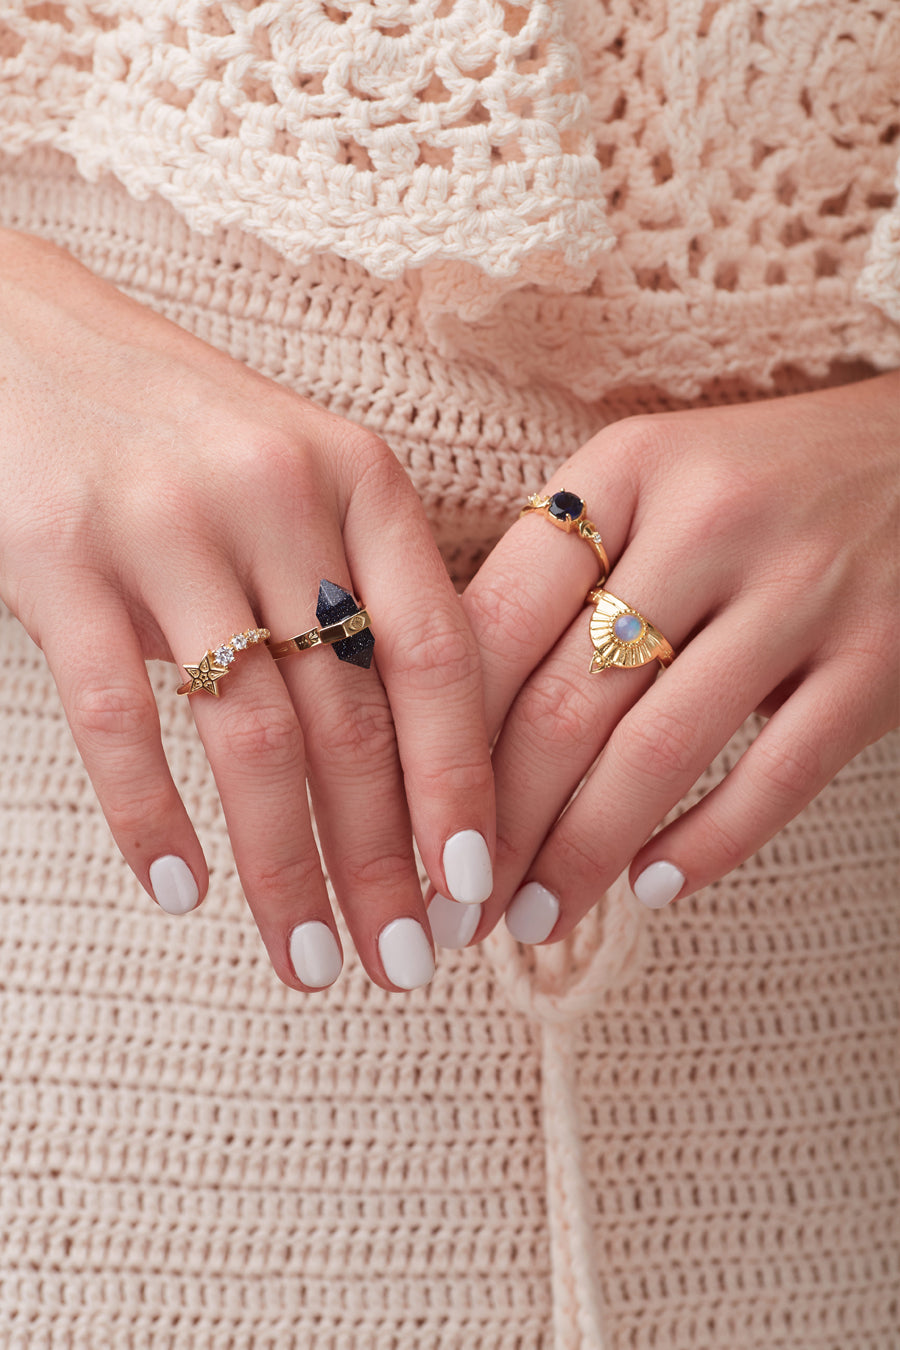 gold star ring and other rings being worn on hands on cream crochet dress